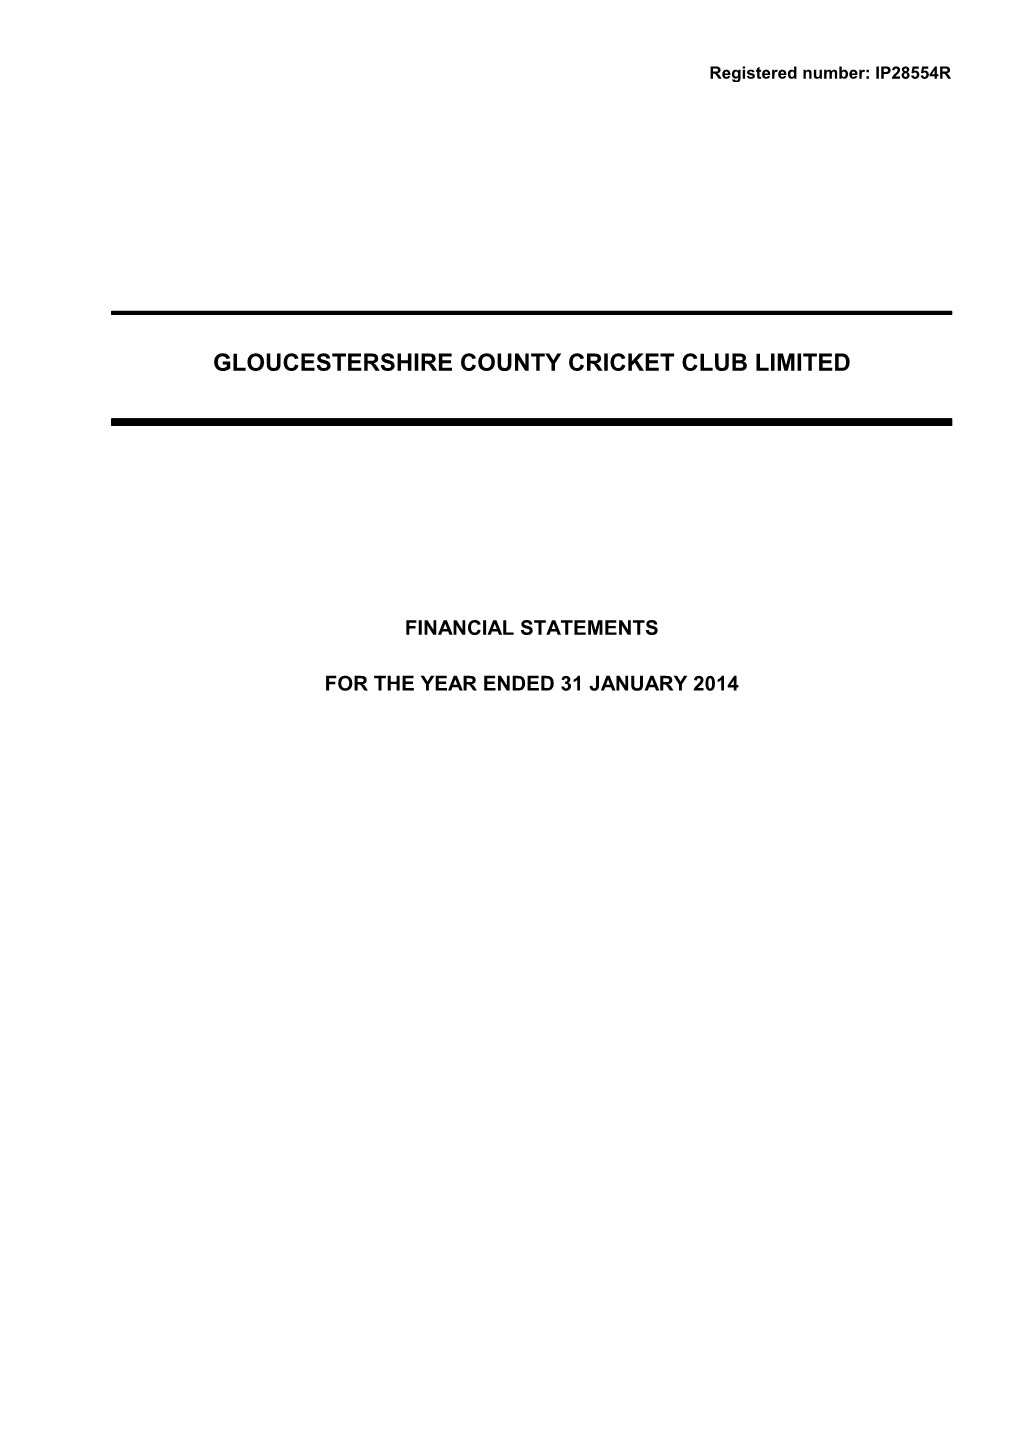 Gloucestershire County Cricket Club Limited